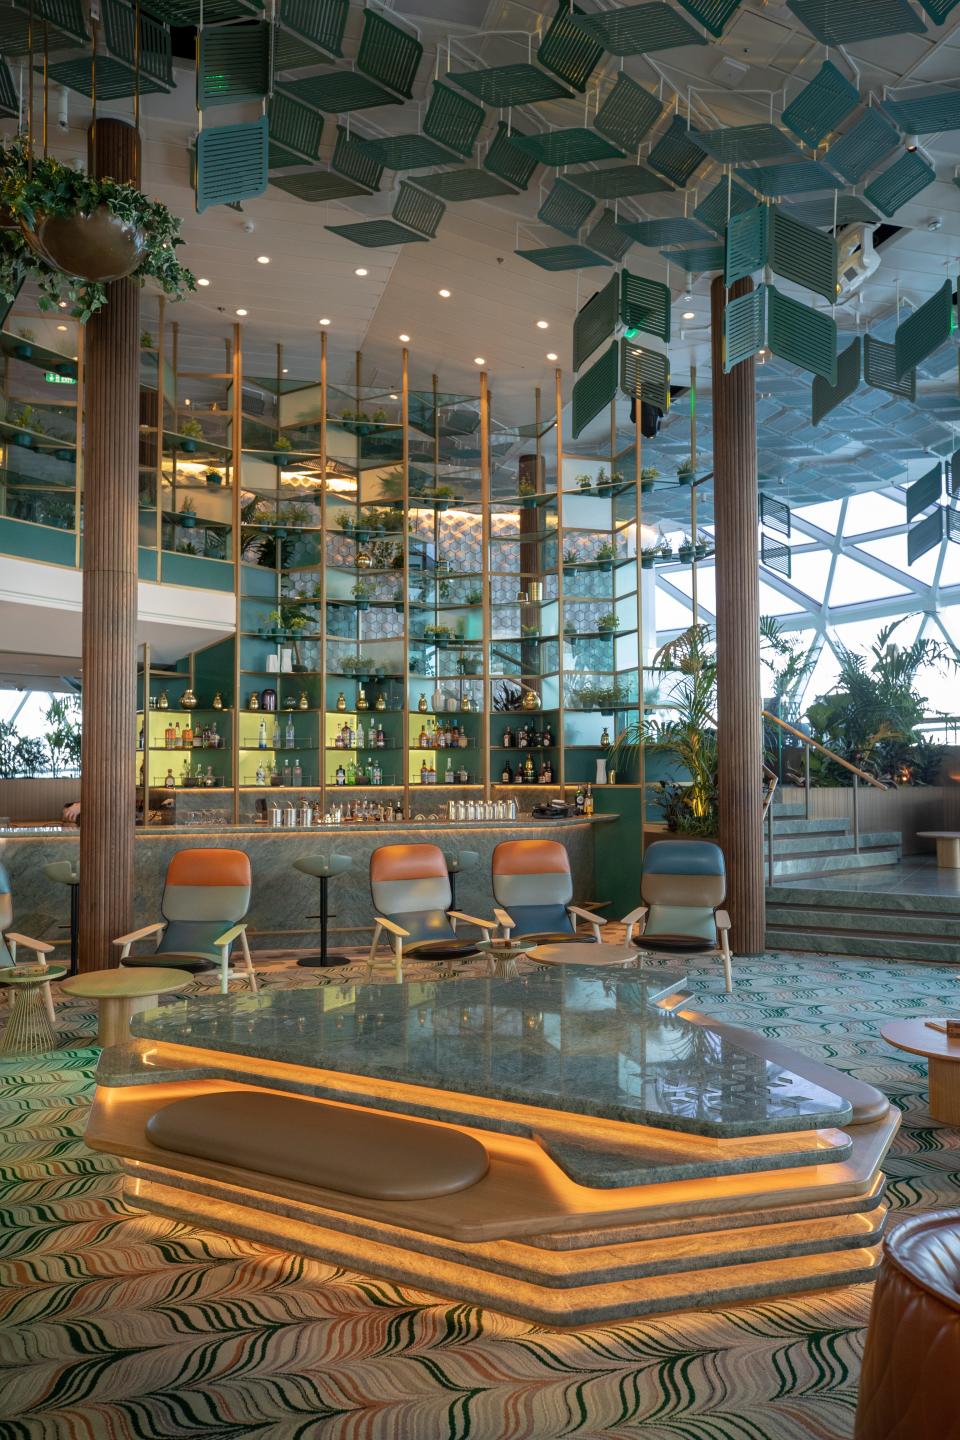 Scott Butler teamed up with Spanish furniture designer Patricia Urquiola on the design of Eden, an edgy restaurant and performance venue unlike anything at sea. It also features a "library of plants."